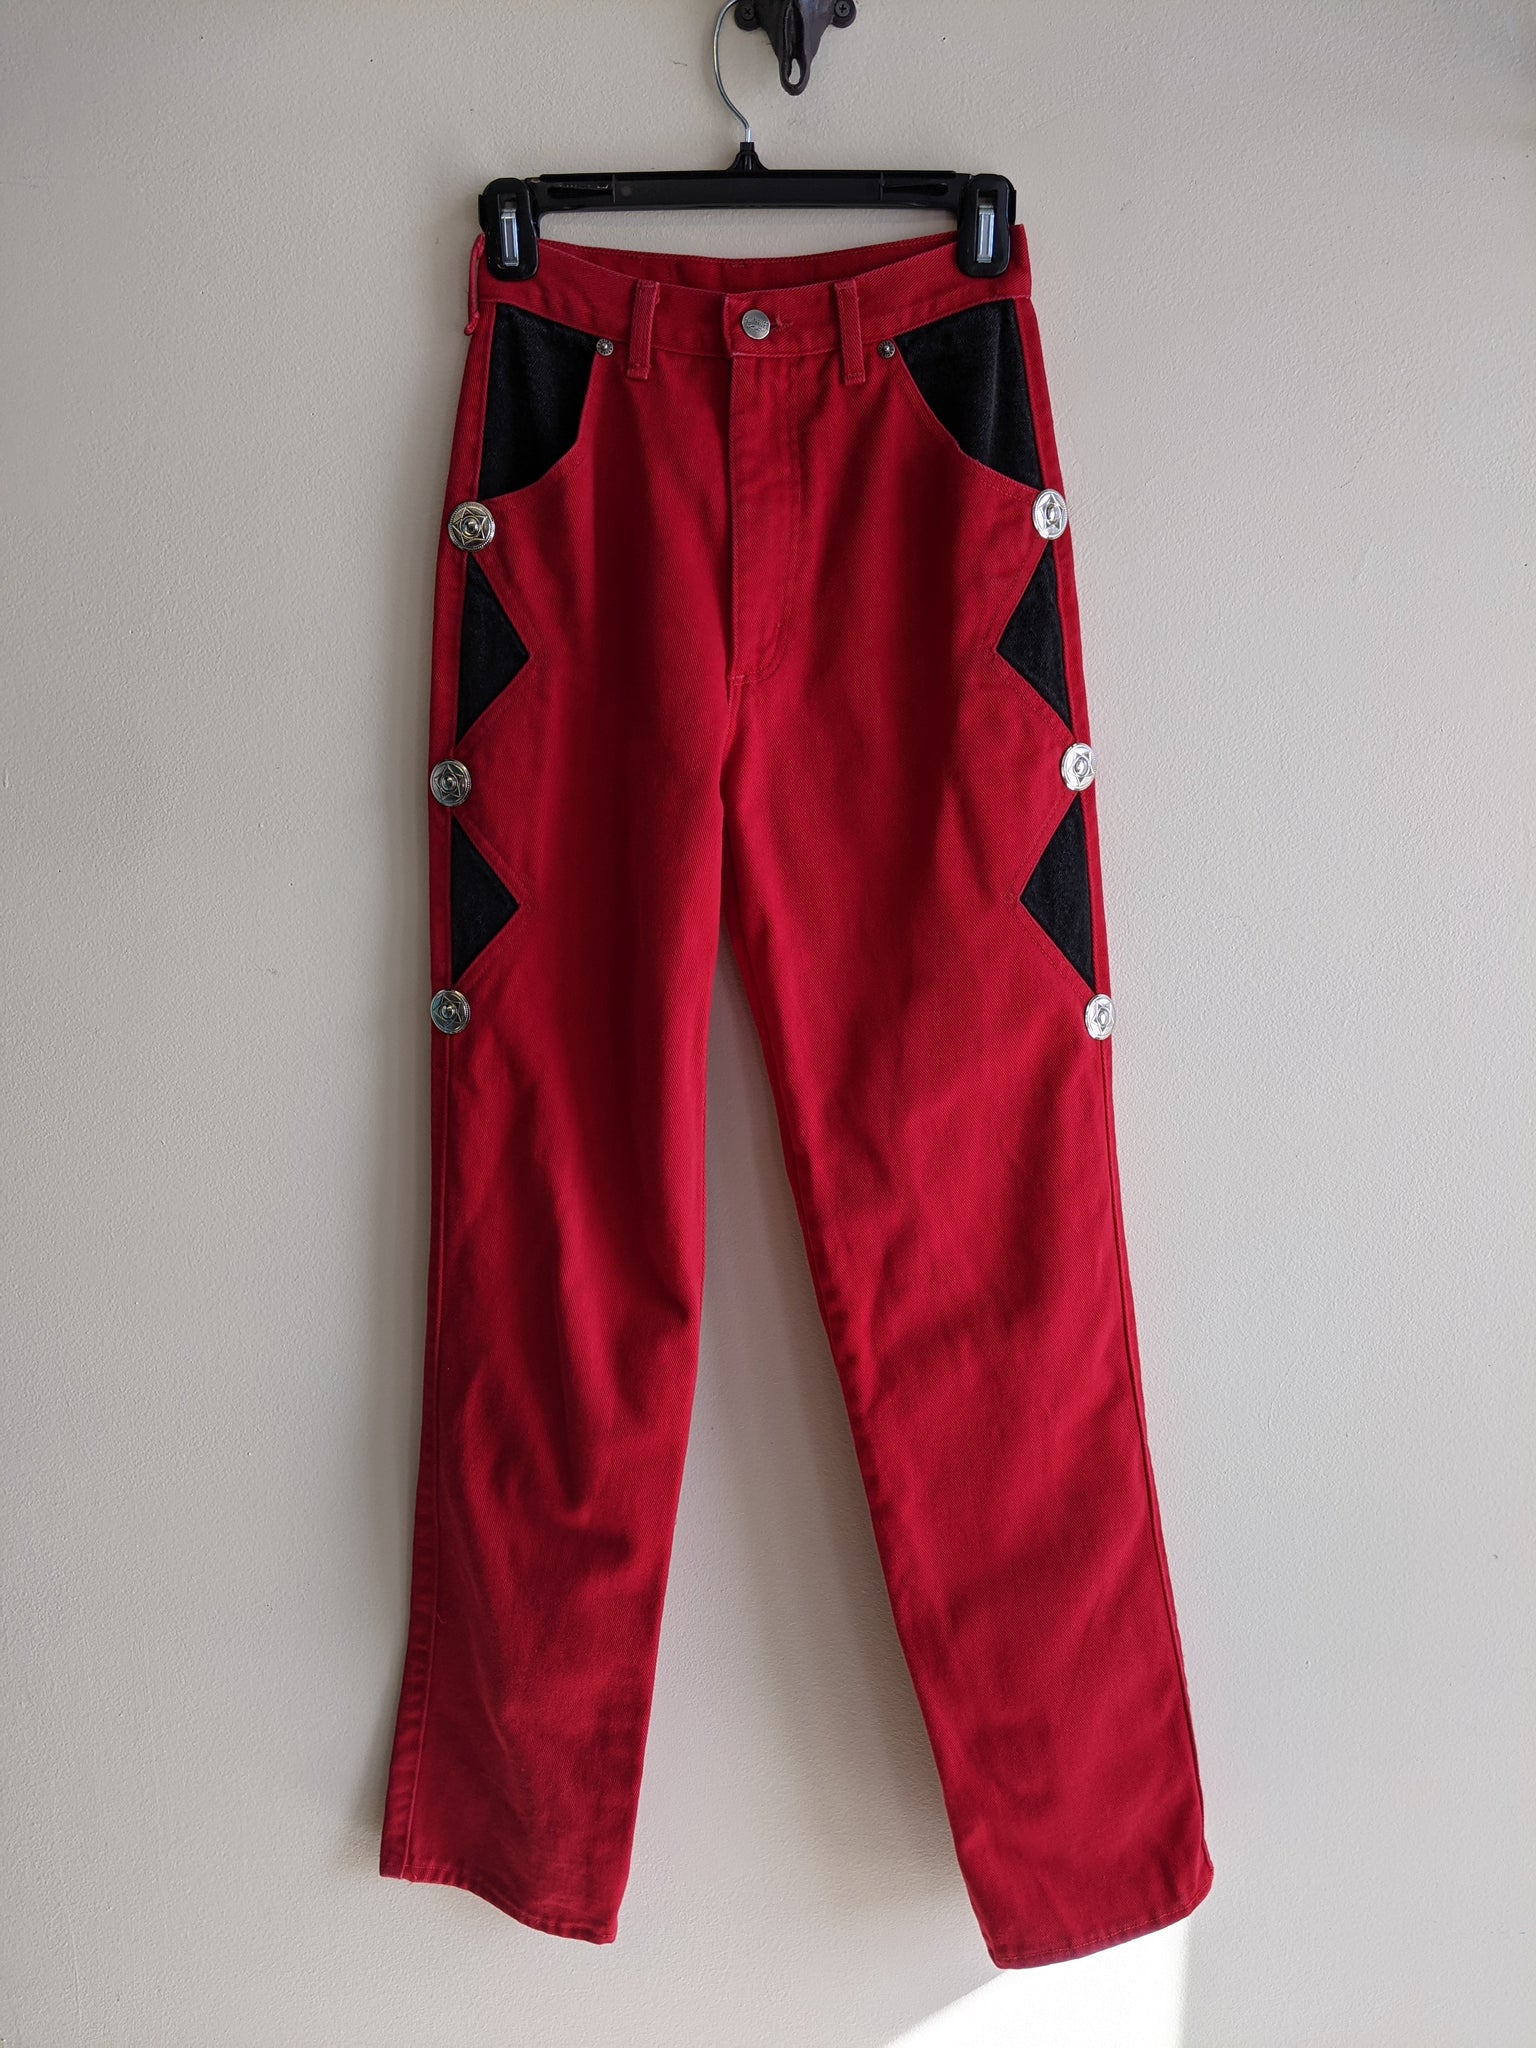 Red Roughrider Western Jeans - S